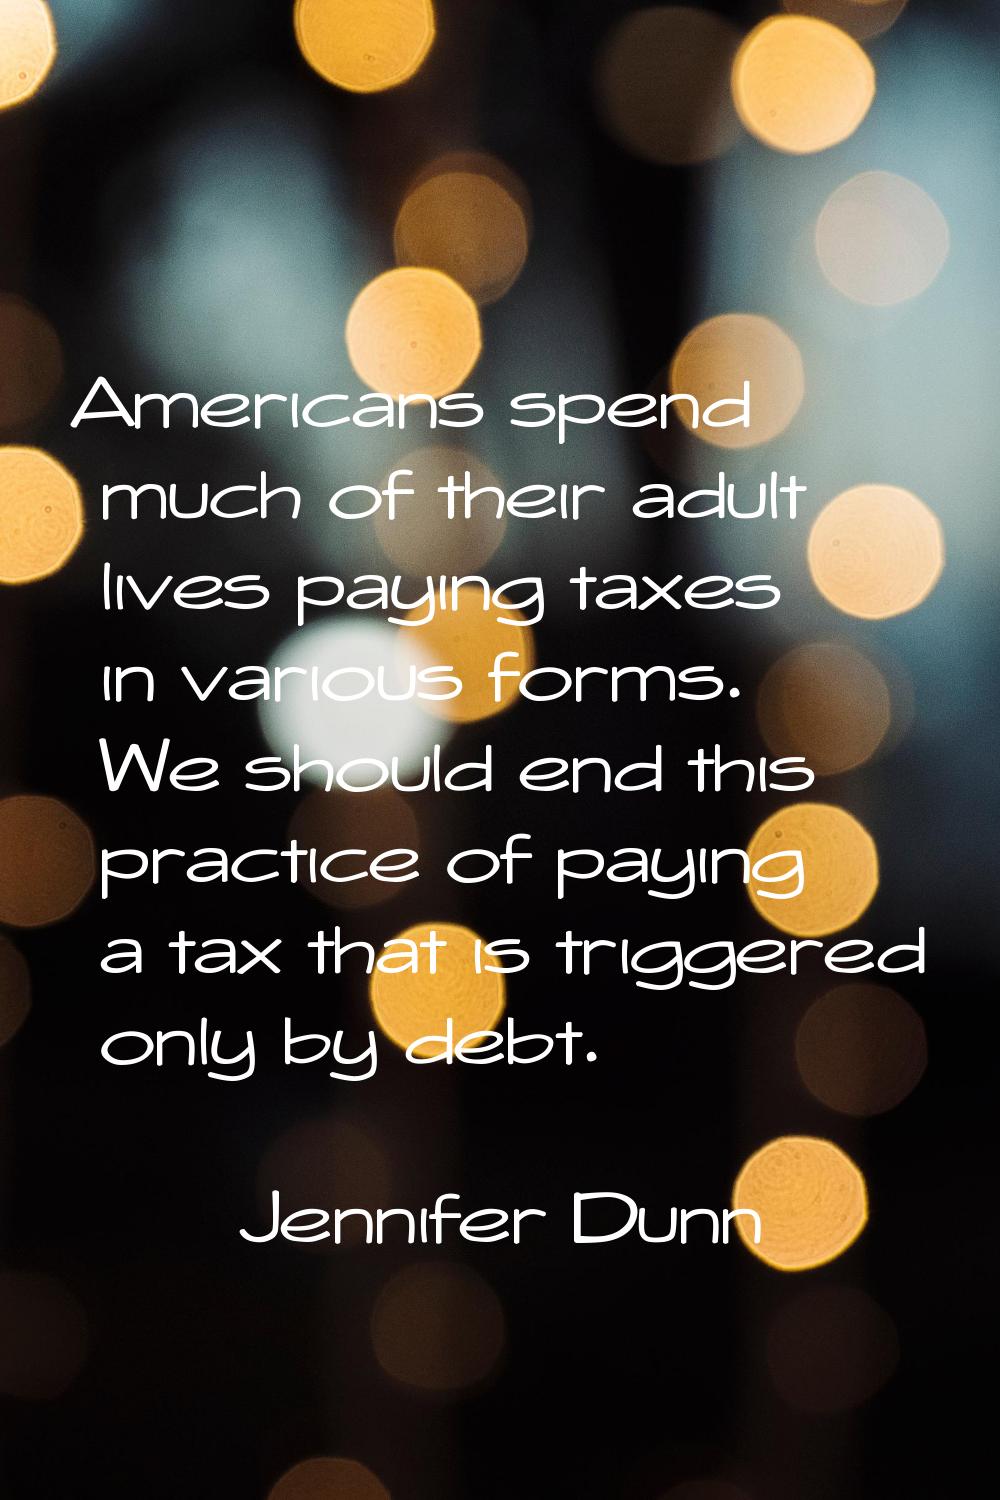 Americans spend much of their adult lives paying taxes in various forms. We should end this practic